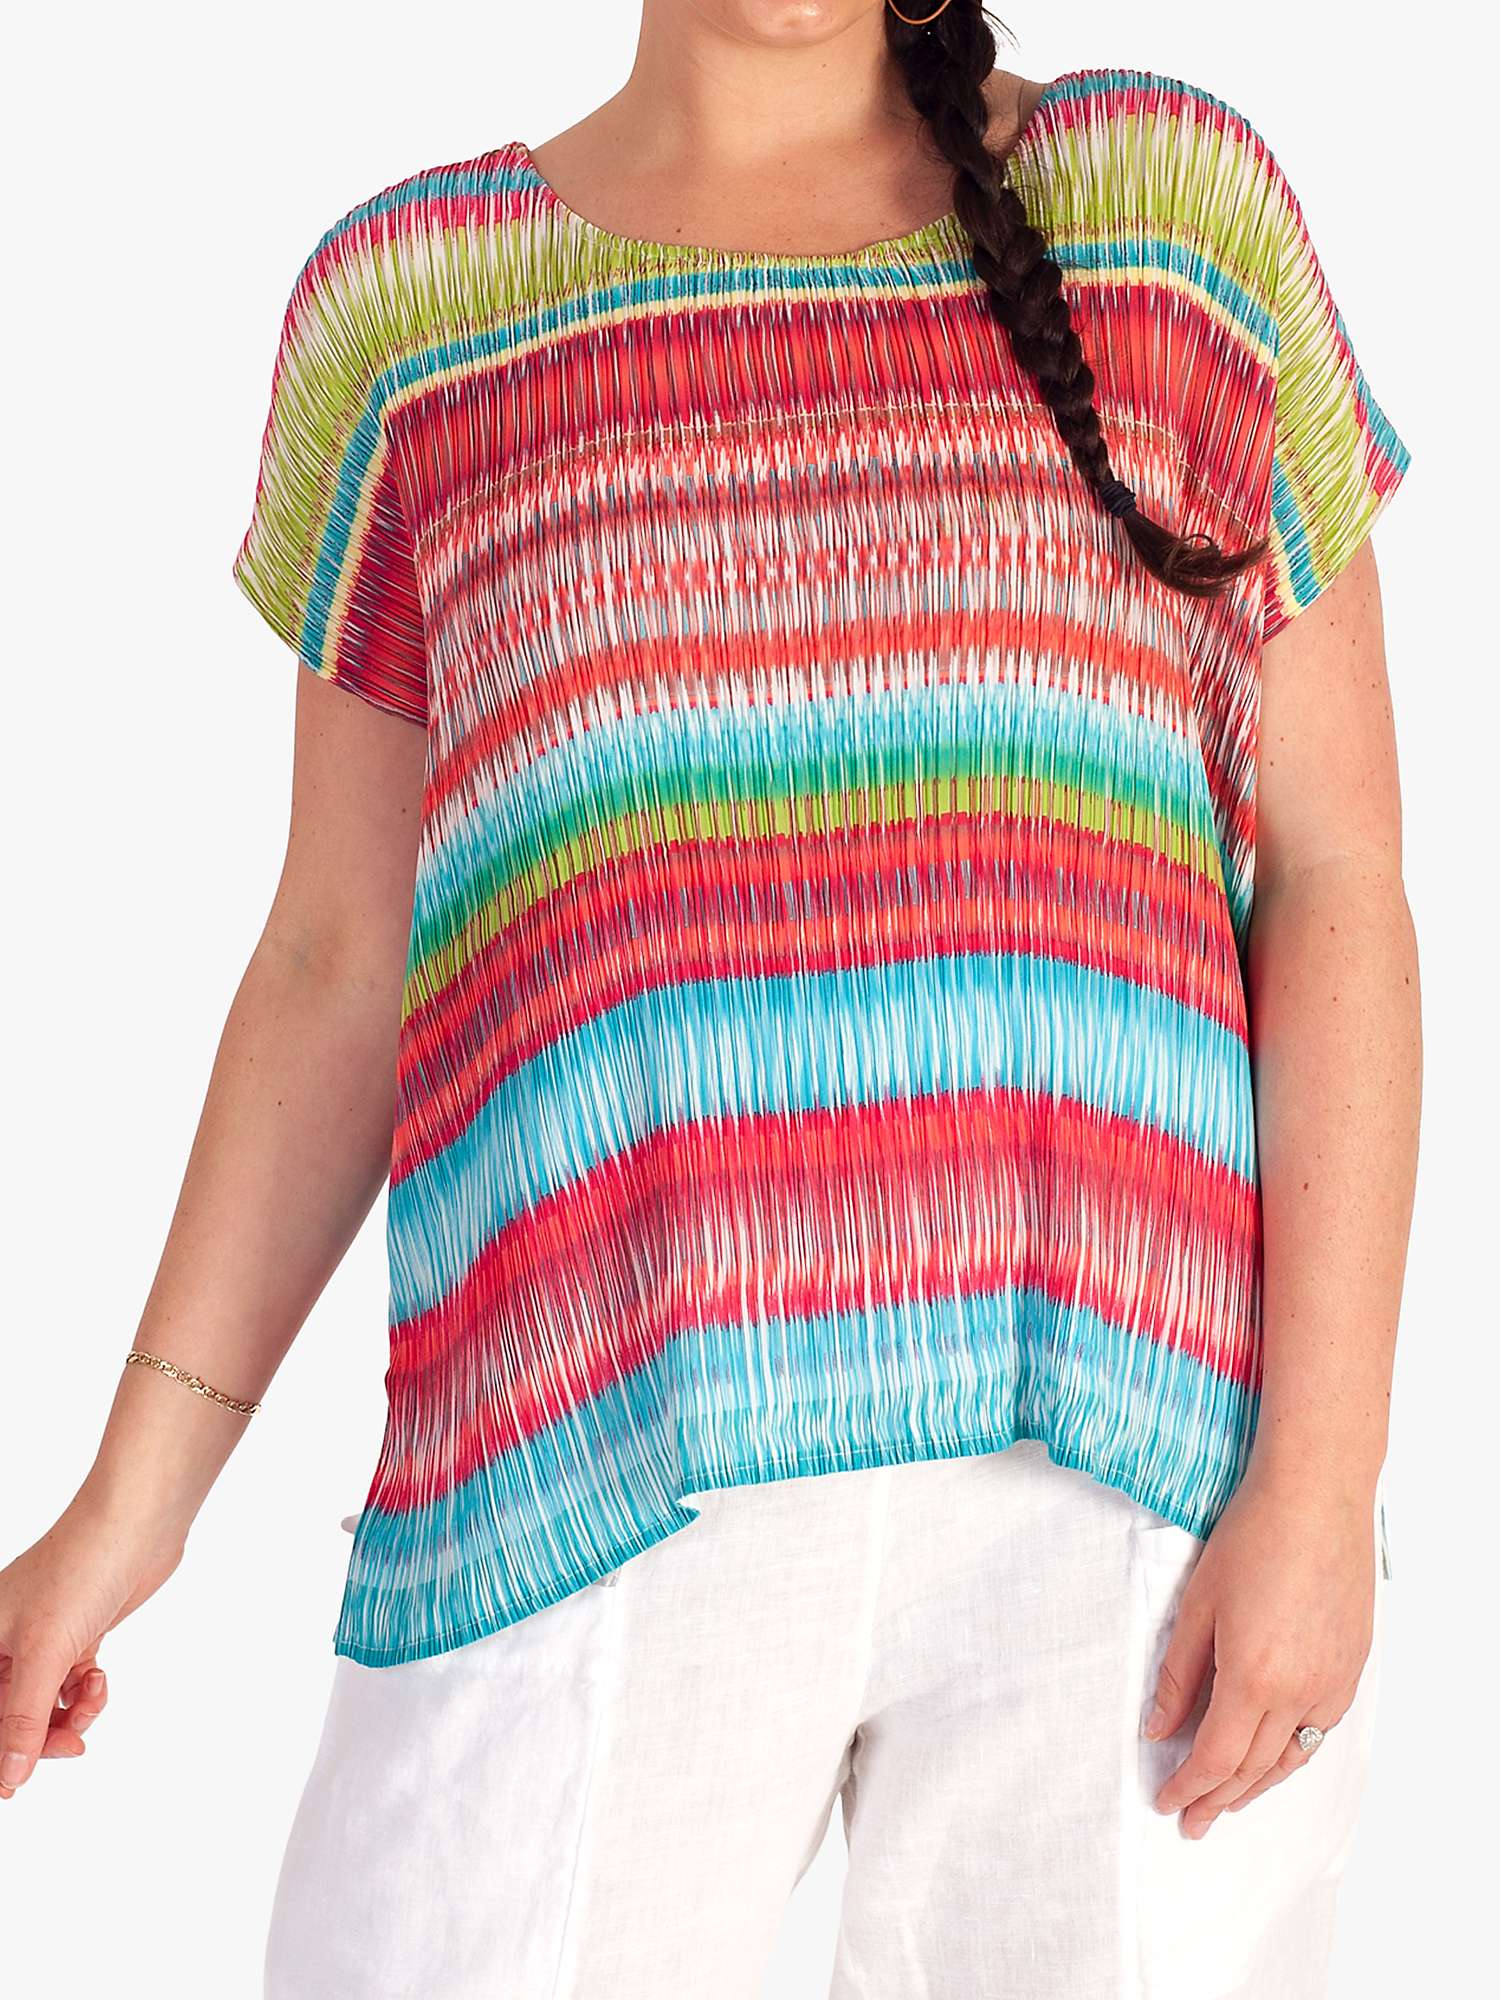 Buy chesca Stripe Print Short Sleeve Top, Coral/Multi Online at johnlewis.com